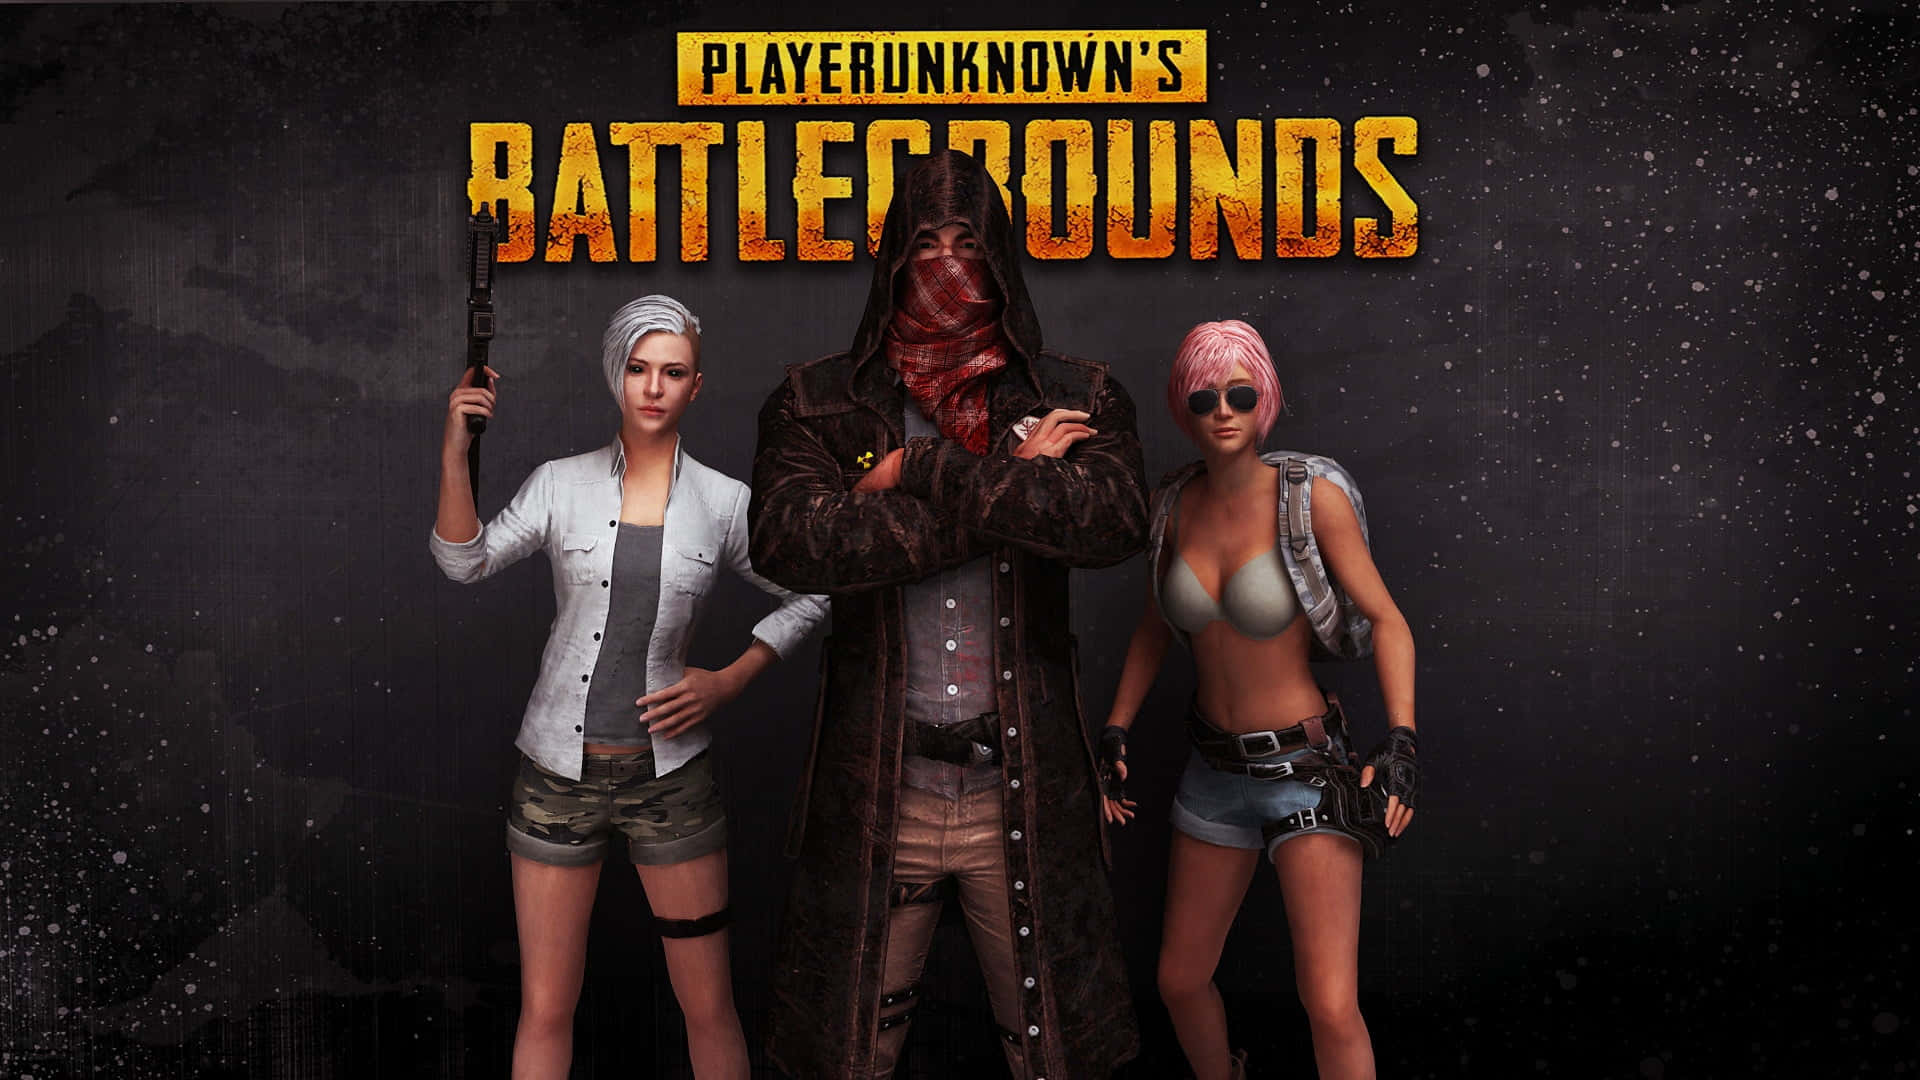 Ready to take down opponents and rule the battleground in Playerunknown's Battlegrounds.